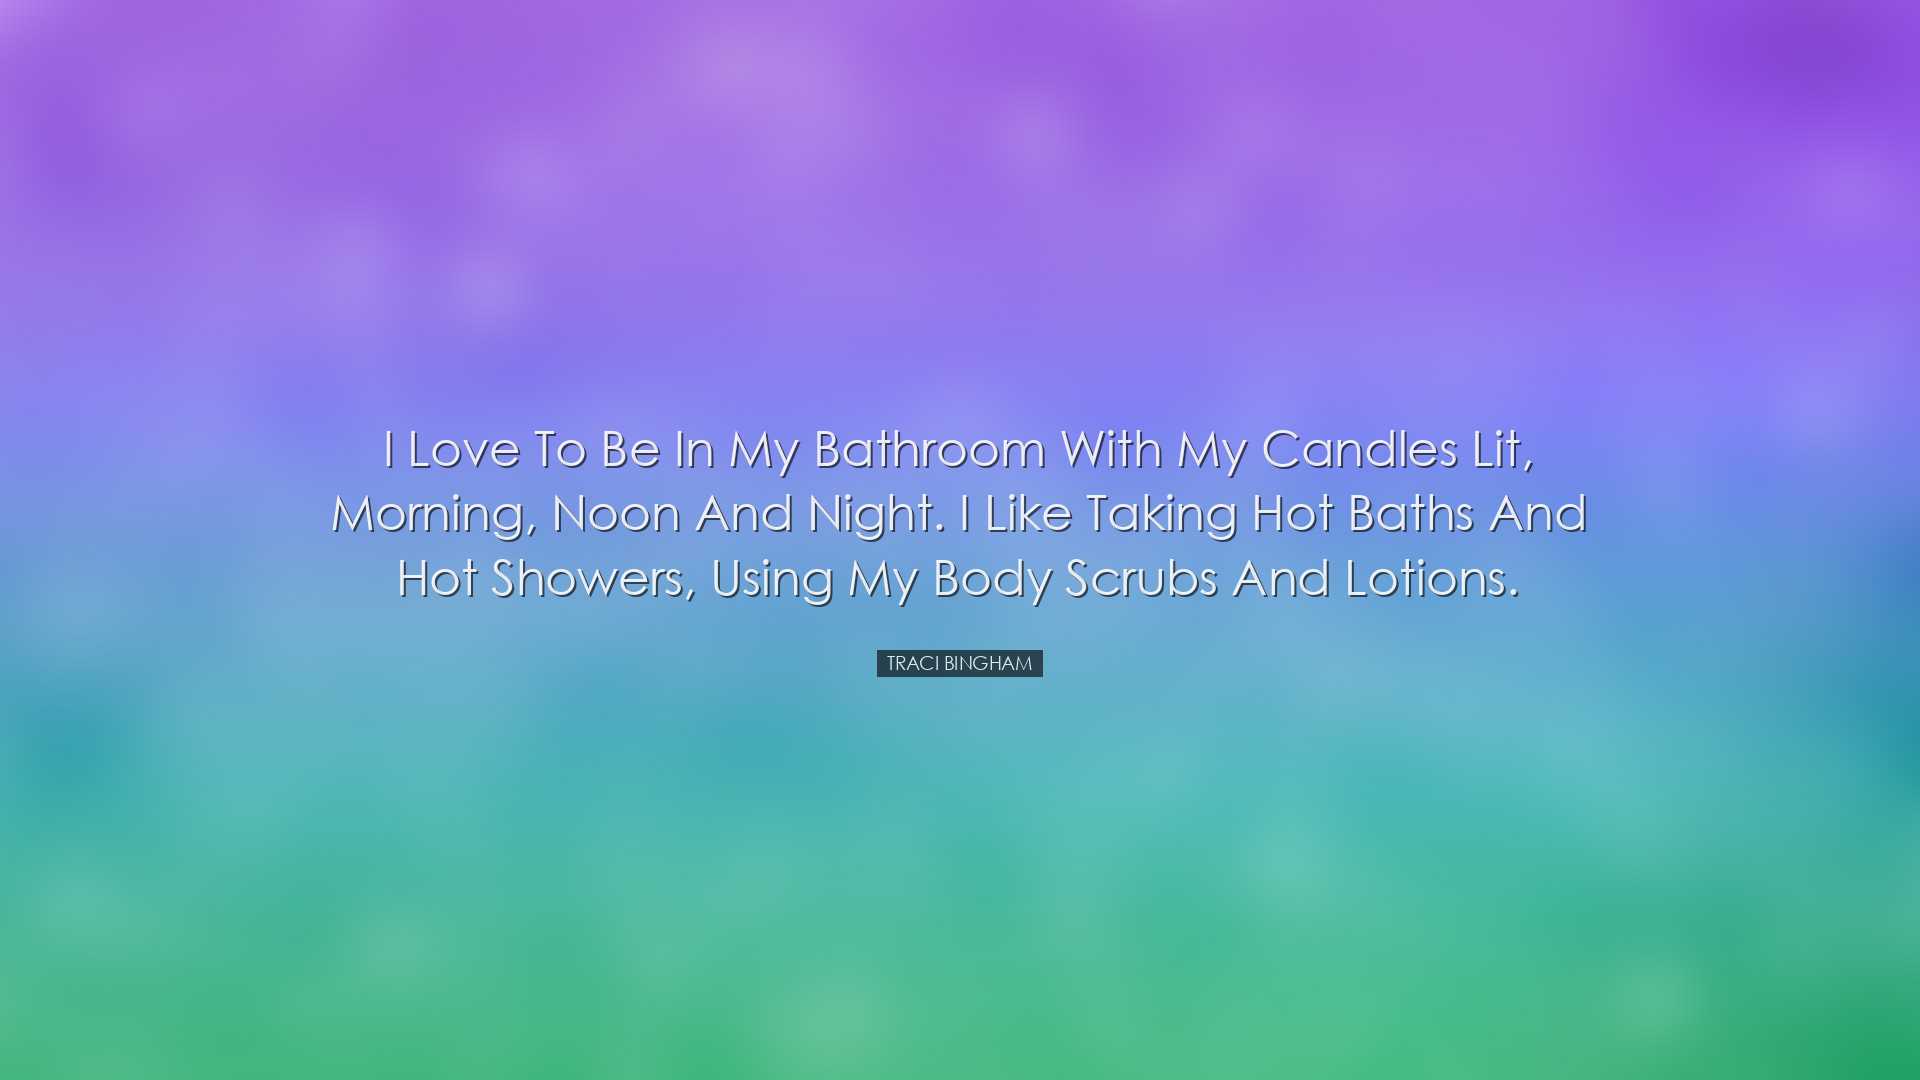 I love to be in my bathroom with my candles lit, morning, noon and